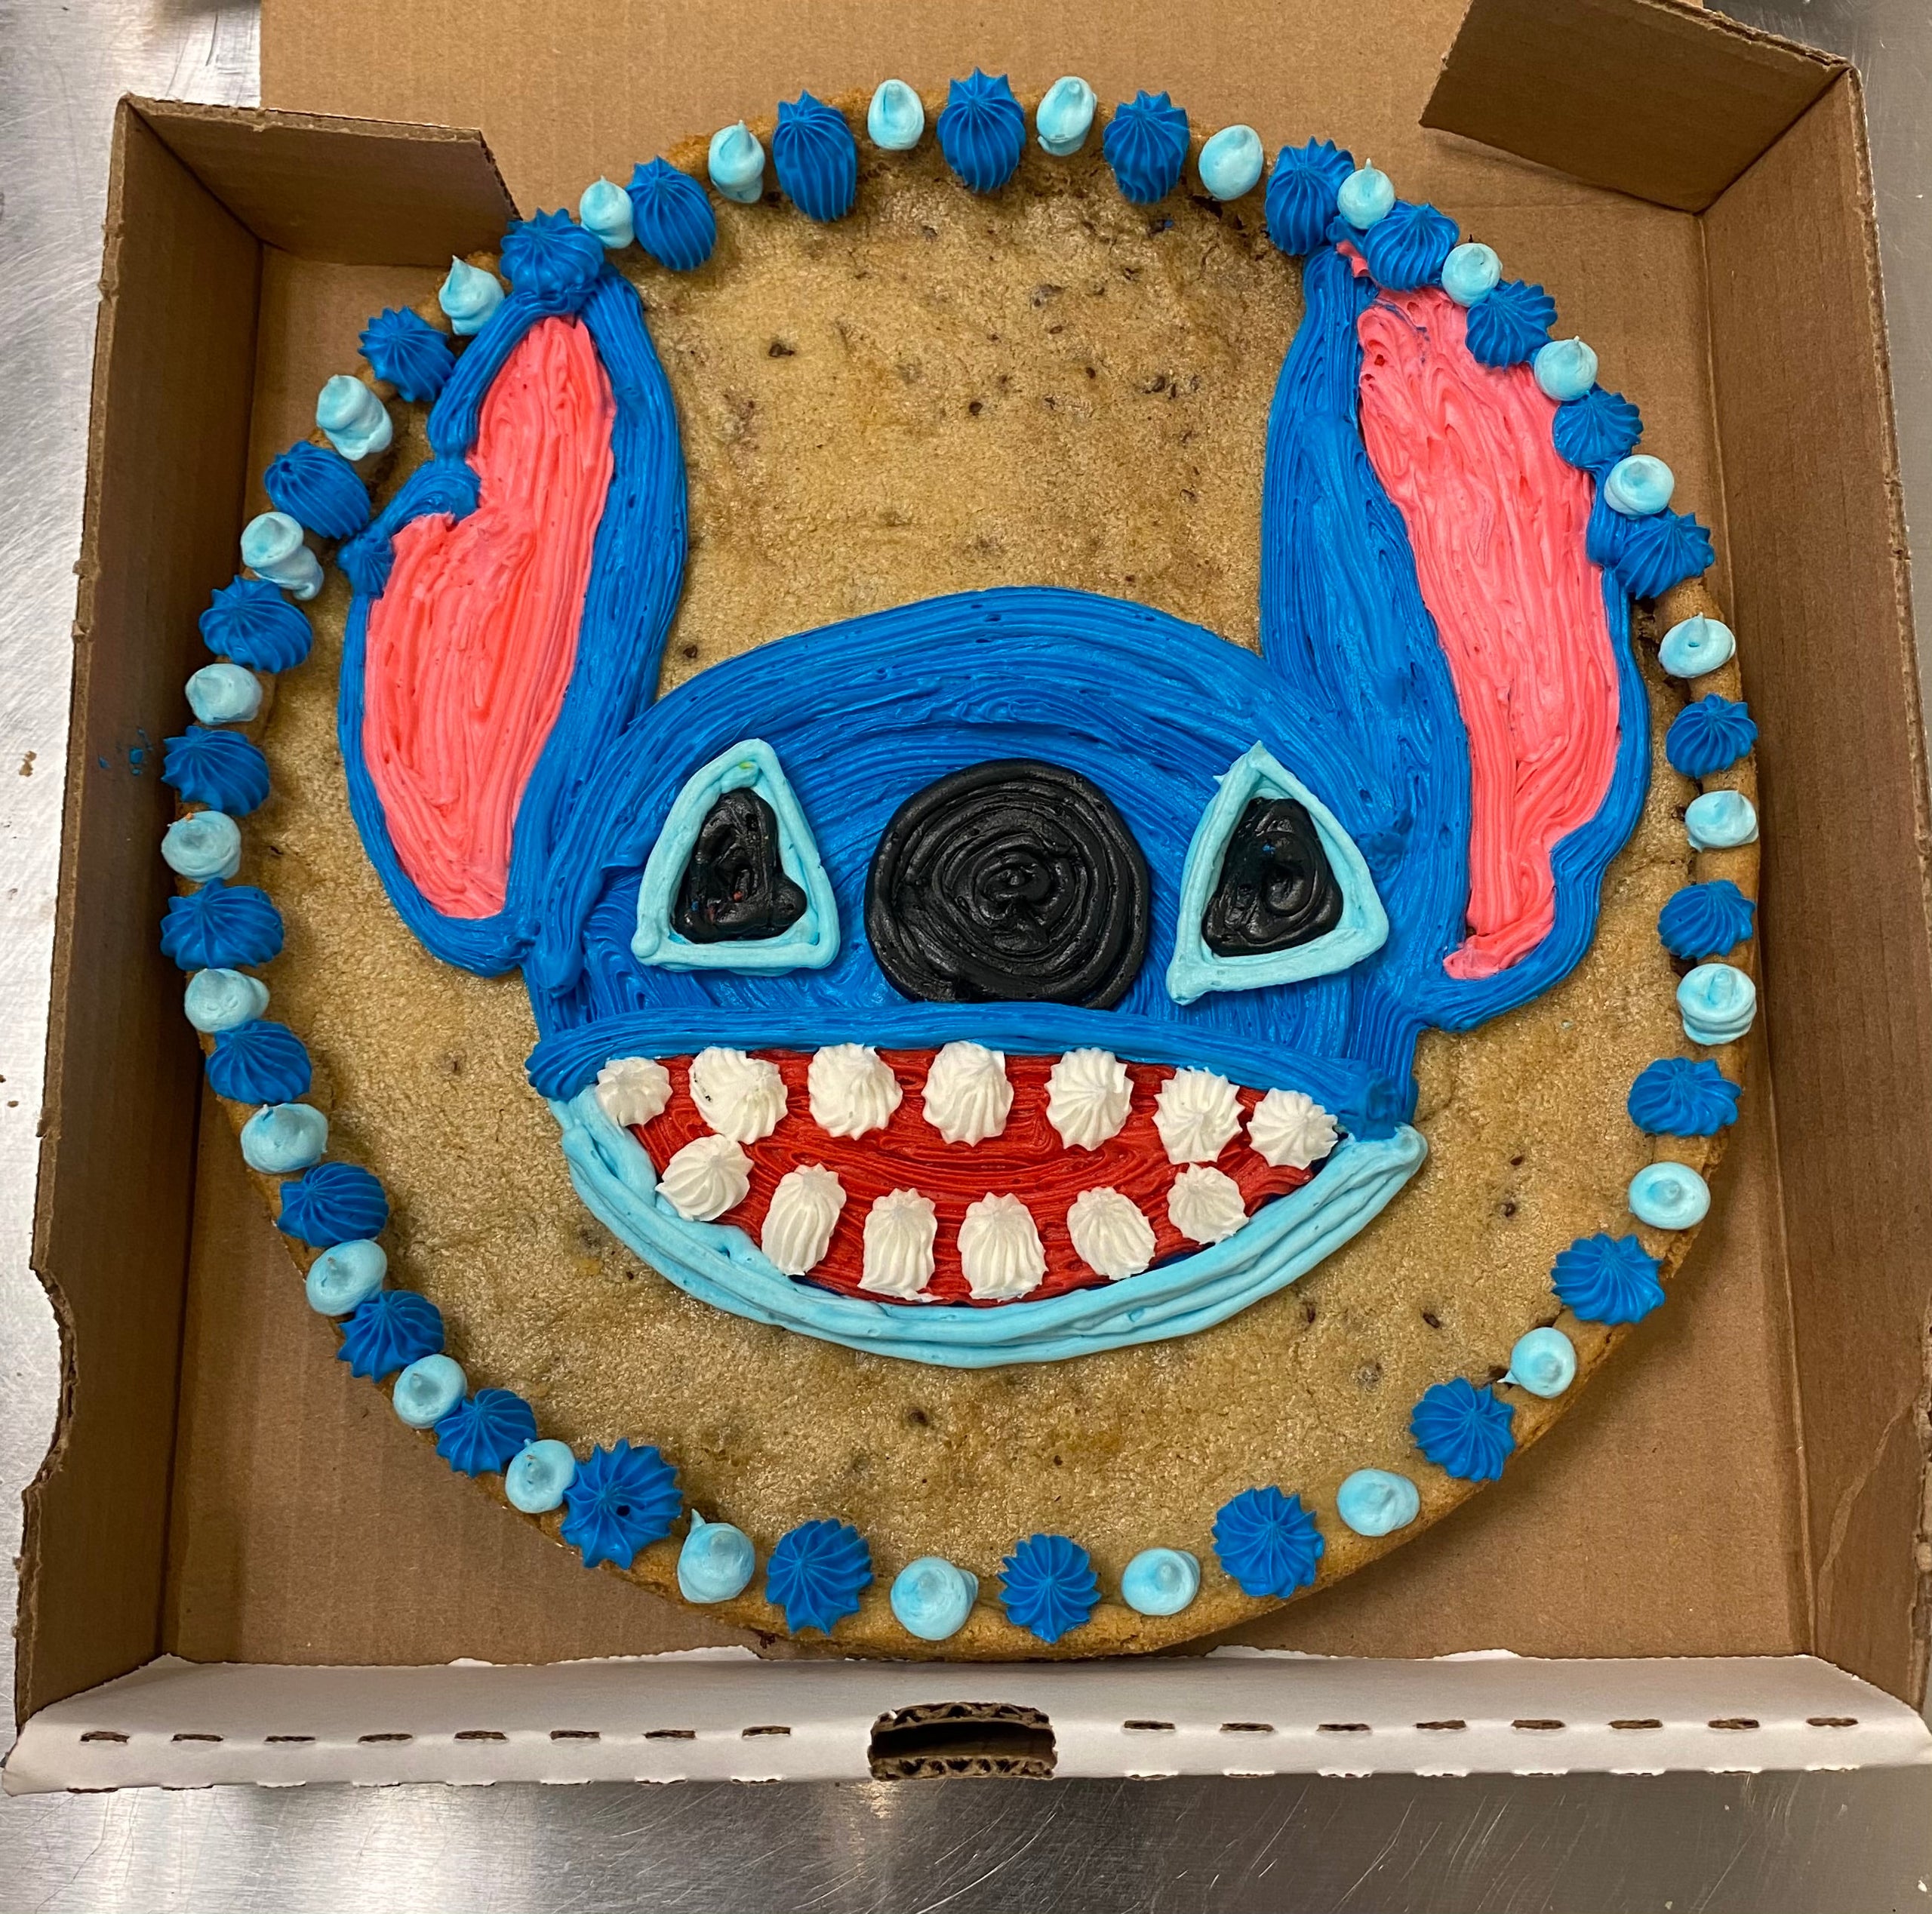 A Stitch cake for a 13 year old - New Cakes on the Block